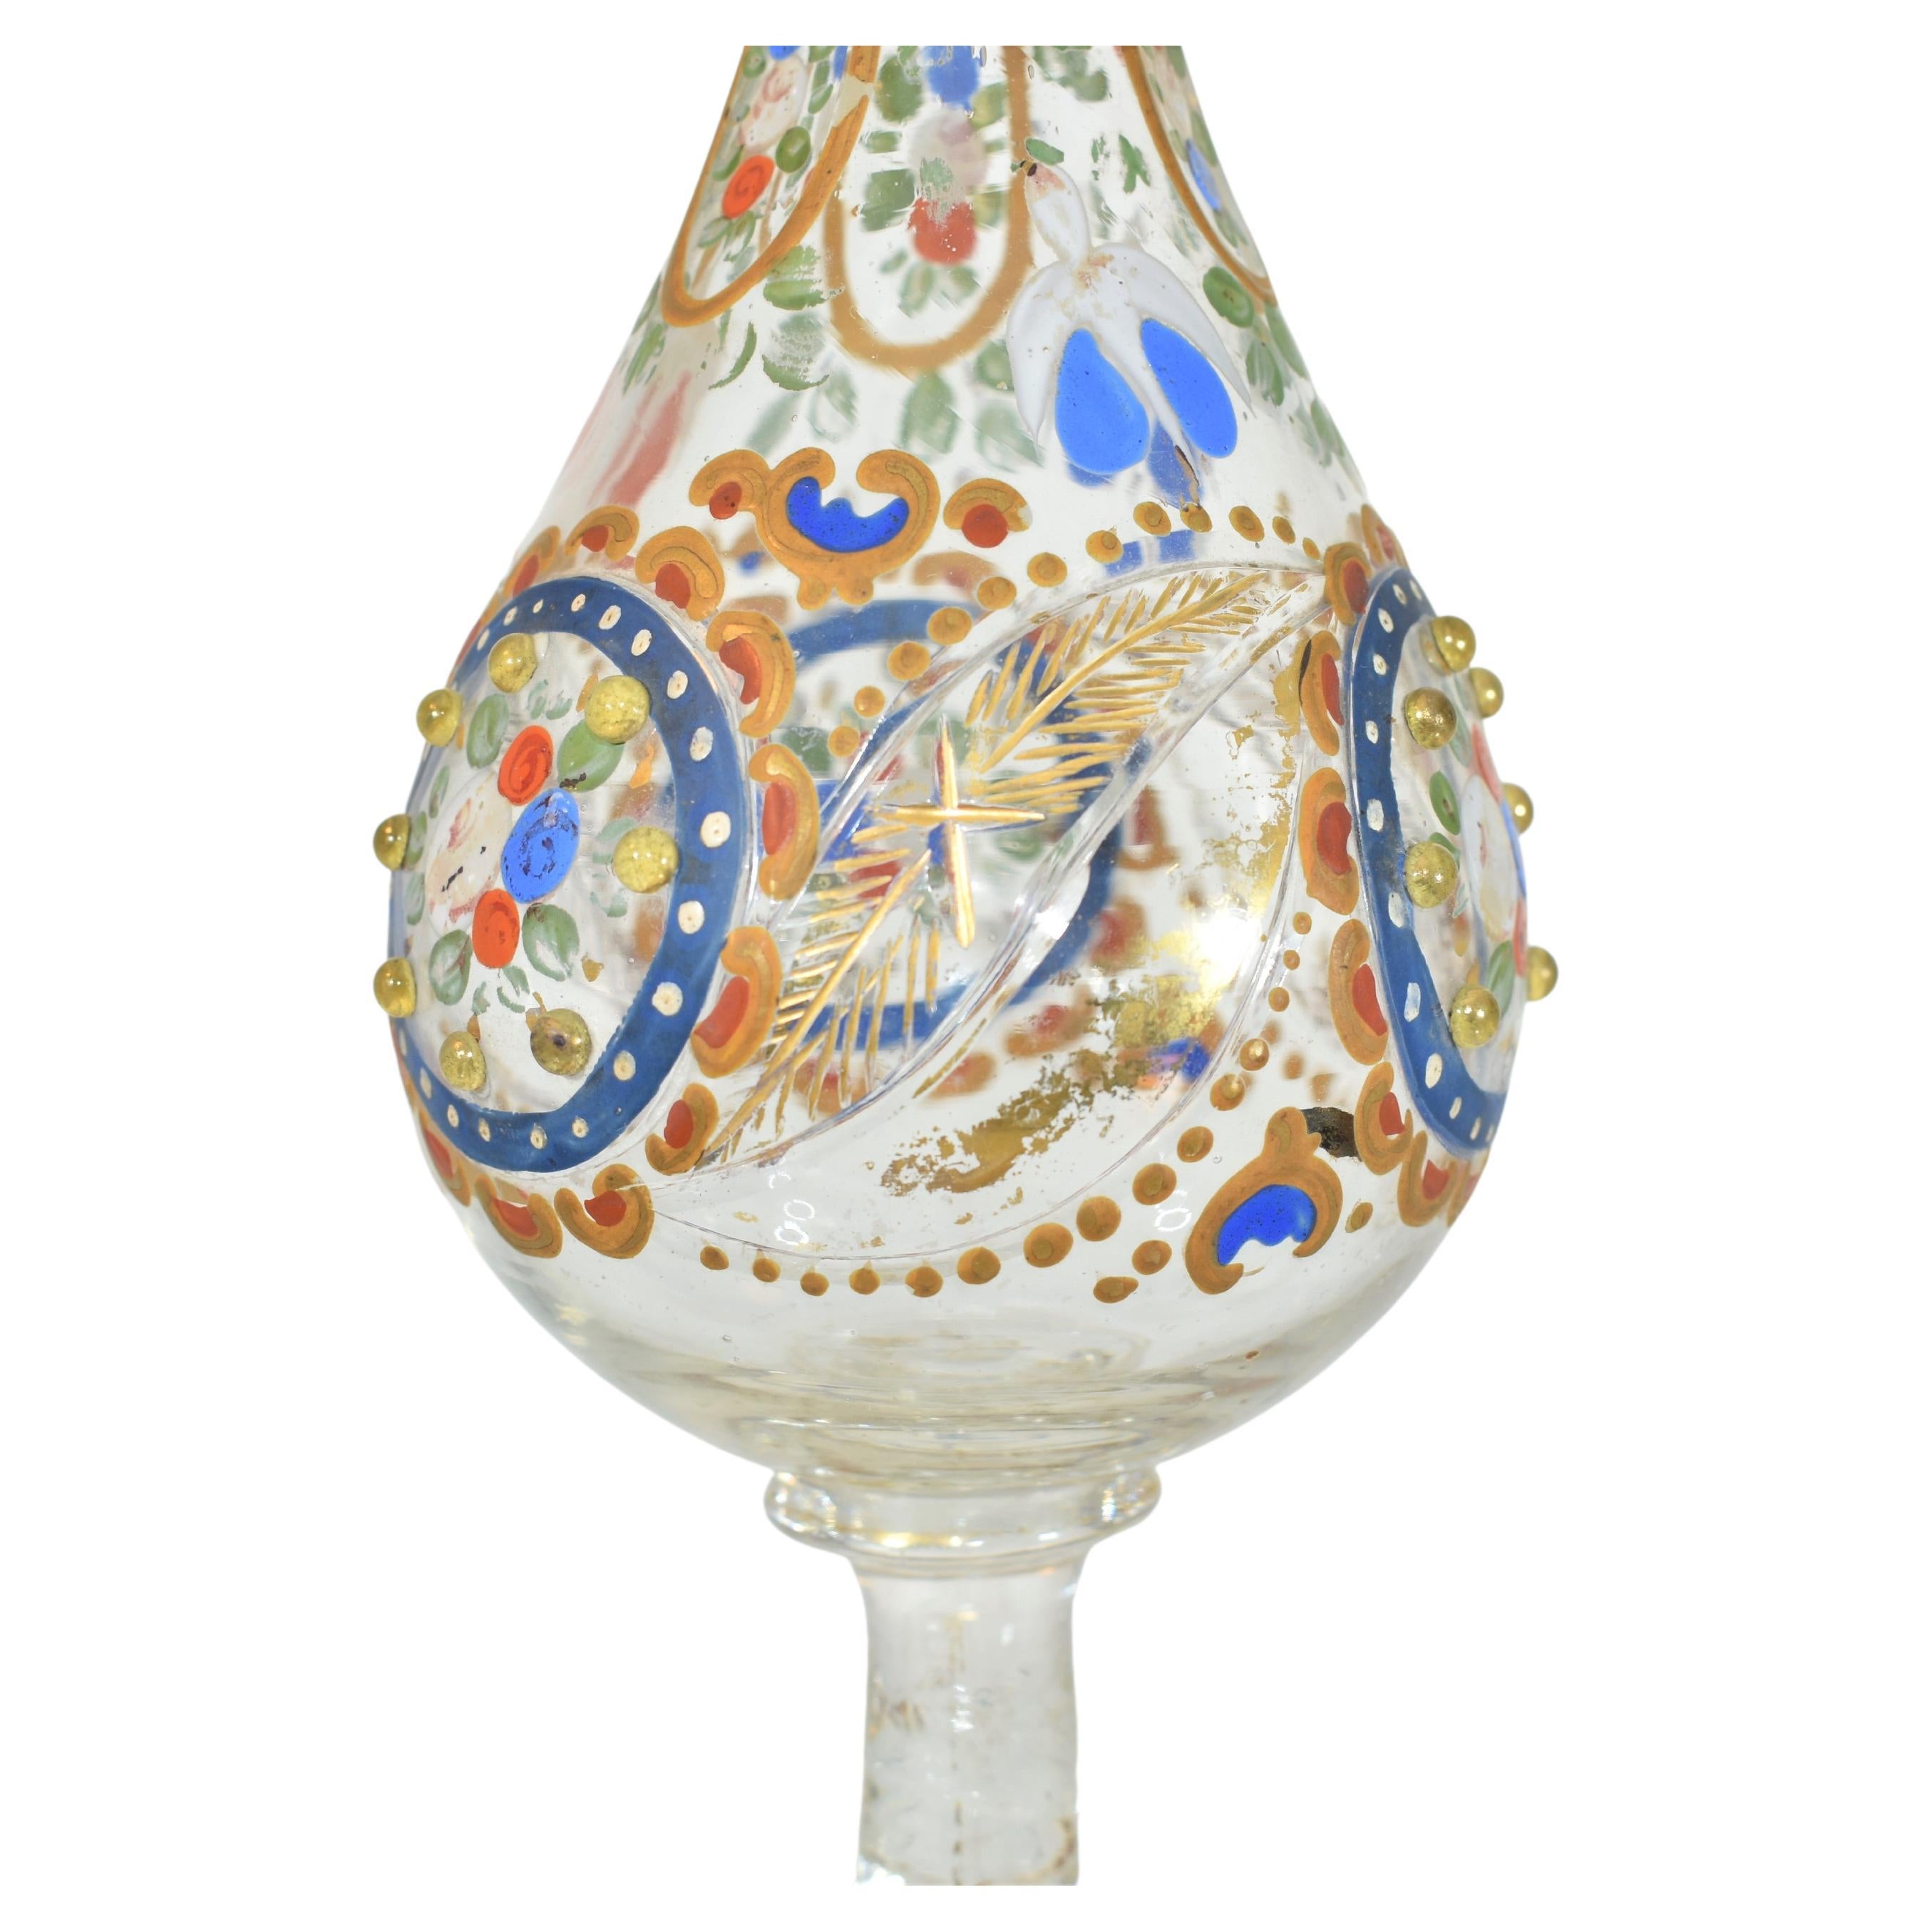 Antique Bohemian Enameled Glass Rose Water Sprinkler, 19th Century In Good Condition For Sale In Rostock, MV